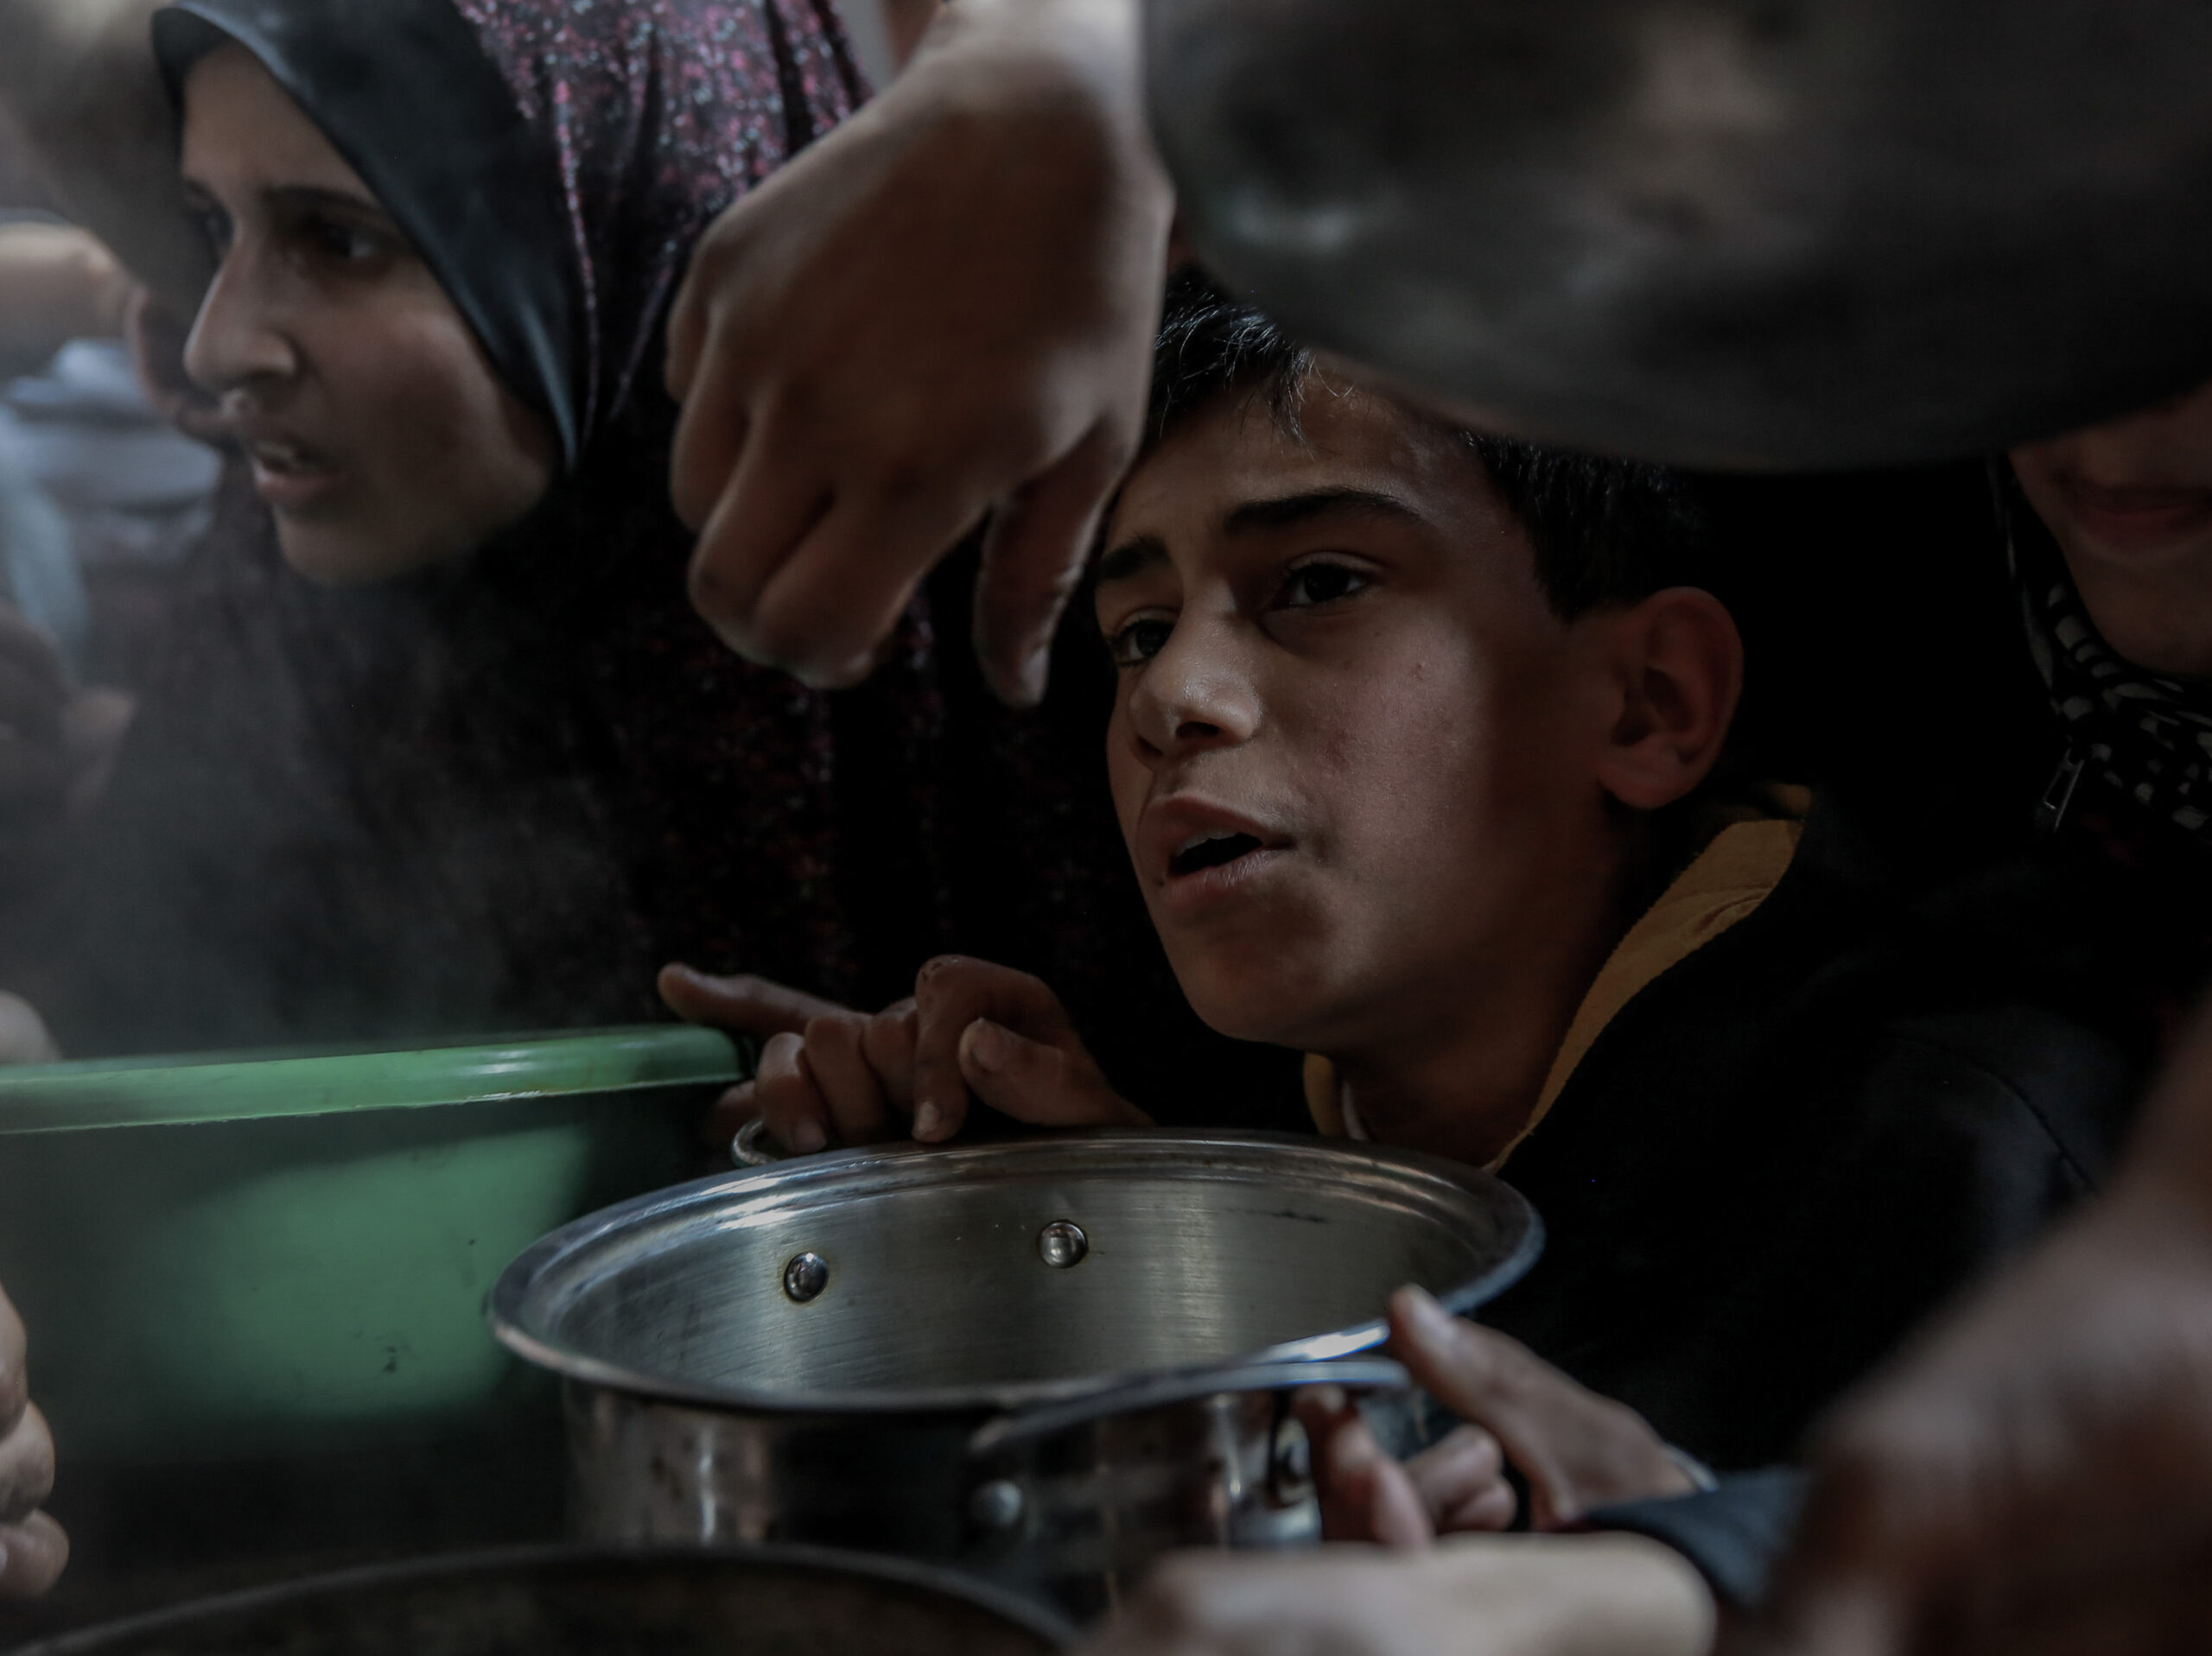 Boiling weeds, eating animal feed: People in Gaza stave off hunger any way they can